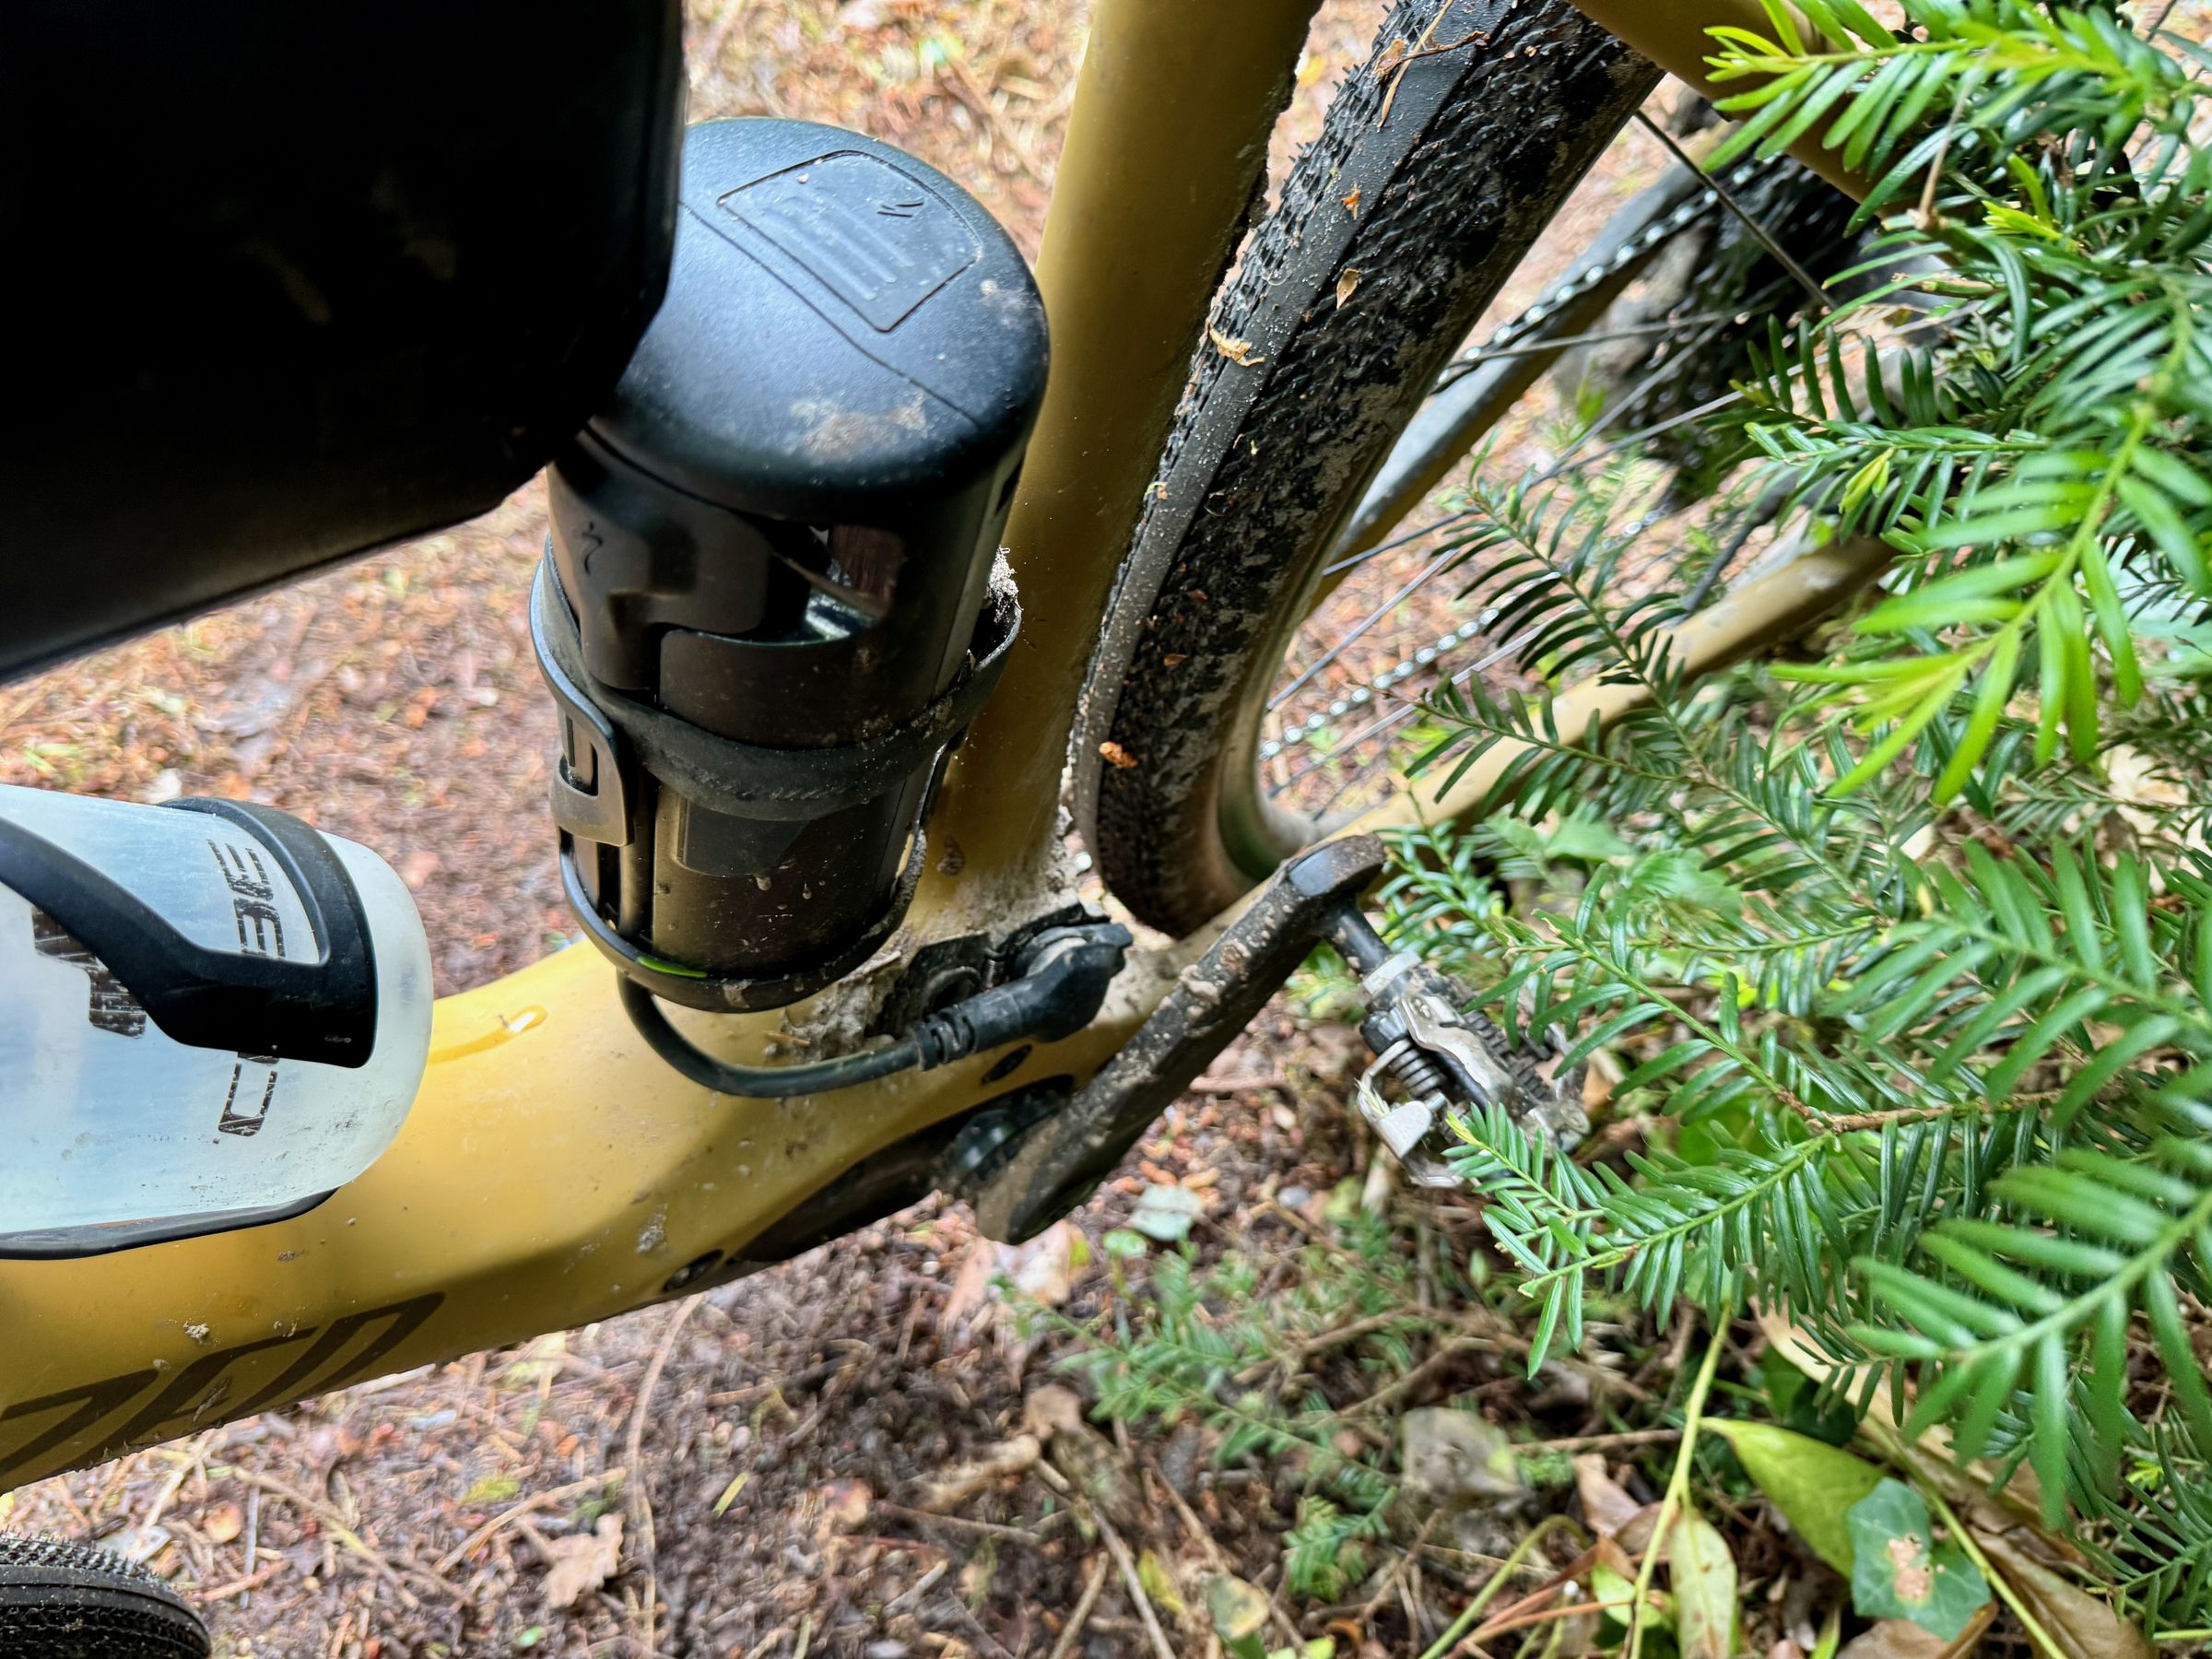 <em>A closer look at the Range Extender and how it connects to the charging port on the Creo 2 Comp e-bike.</em>